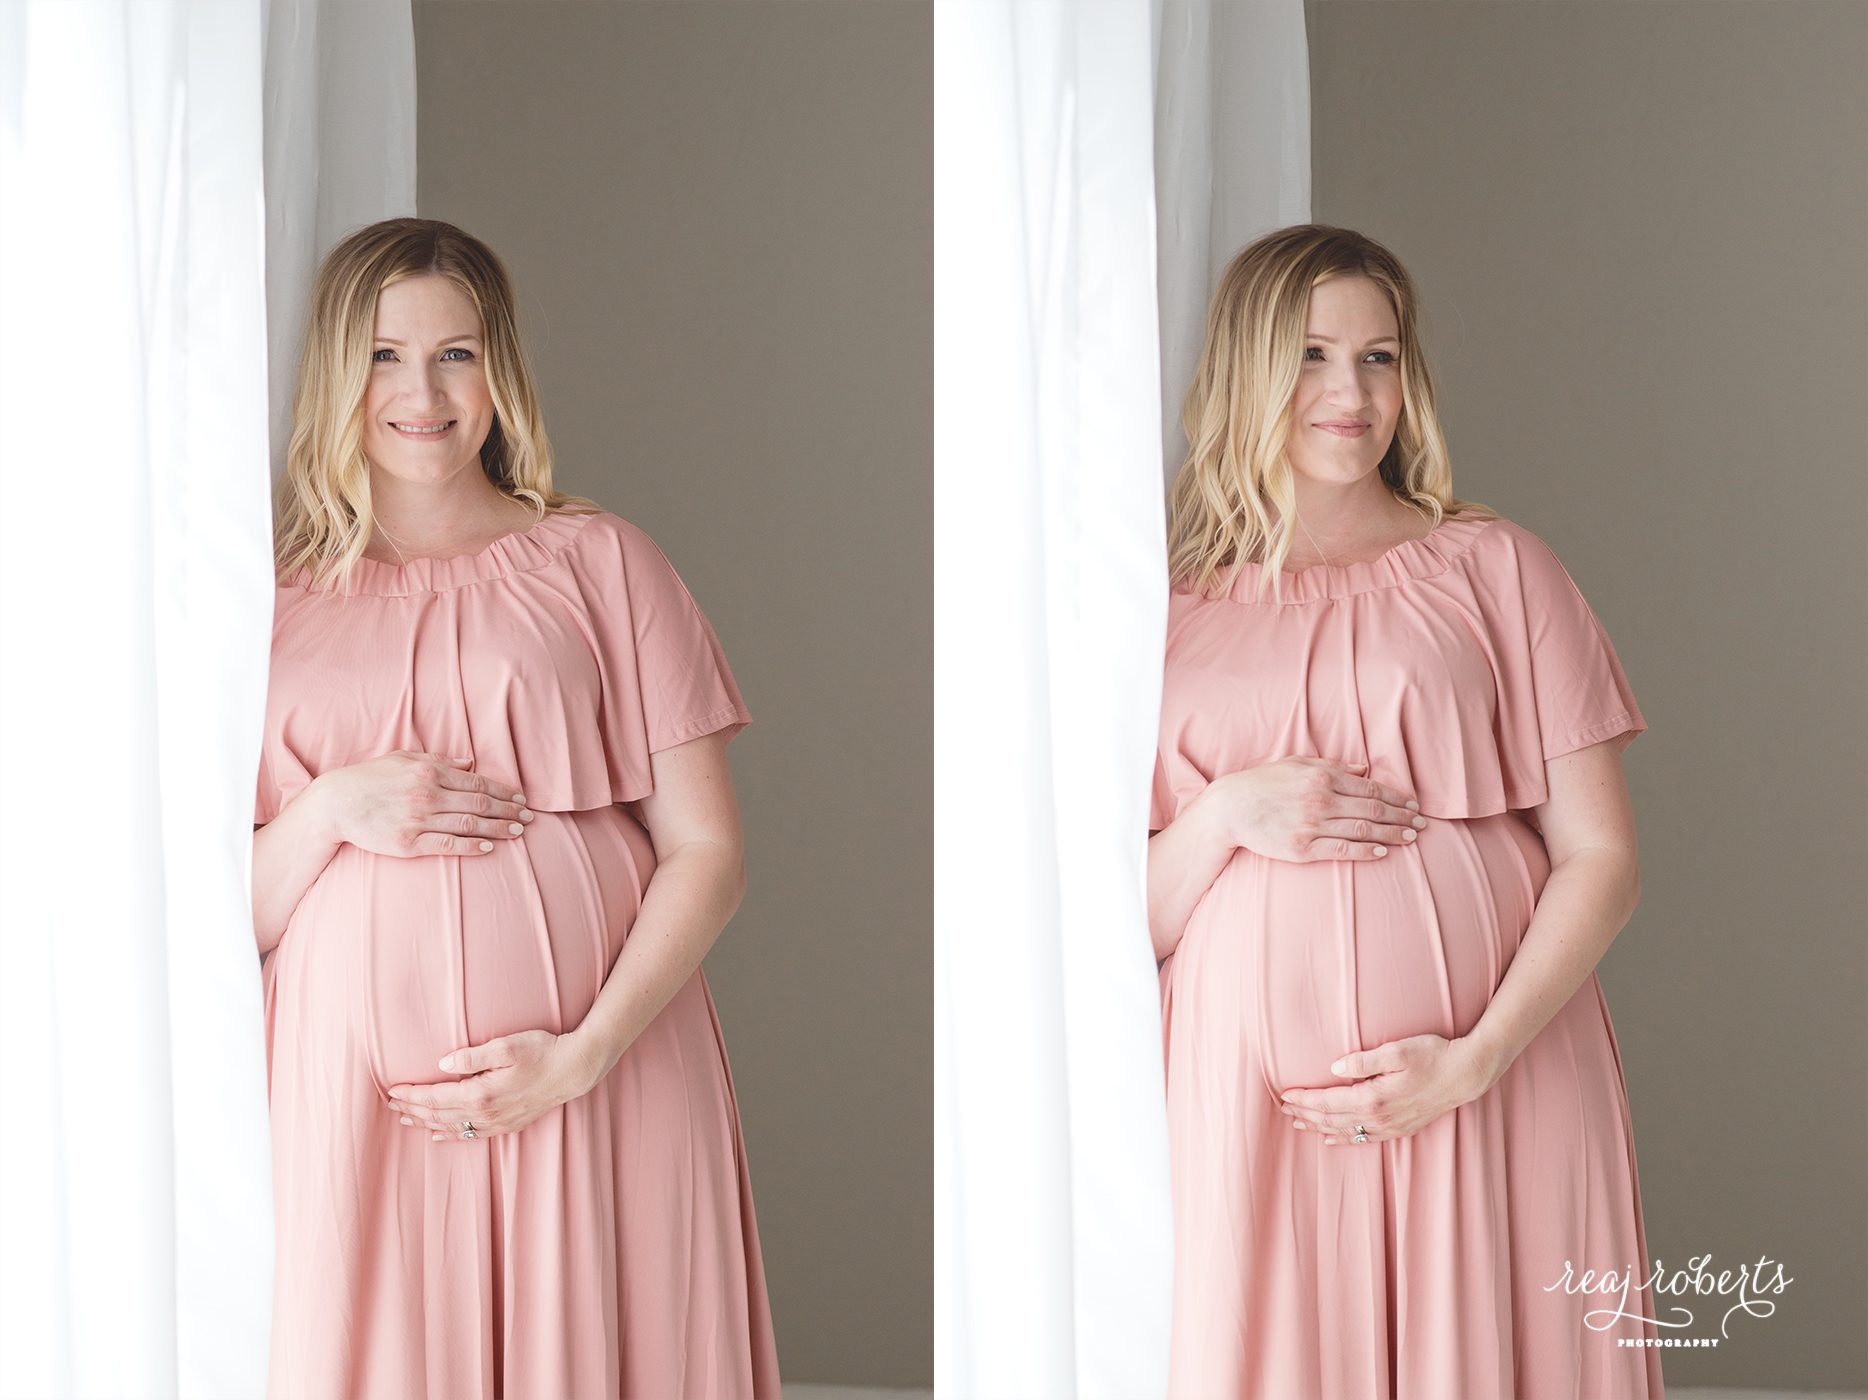 What to wear maternity session | Reaj Roberts Photography